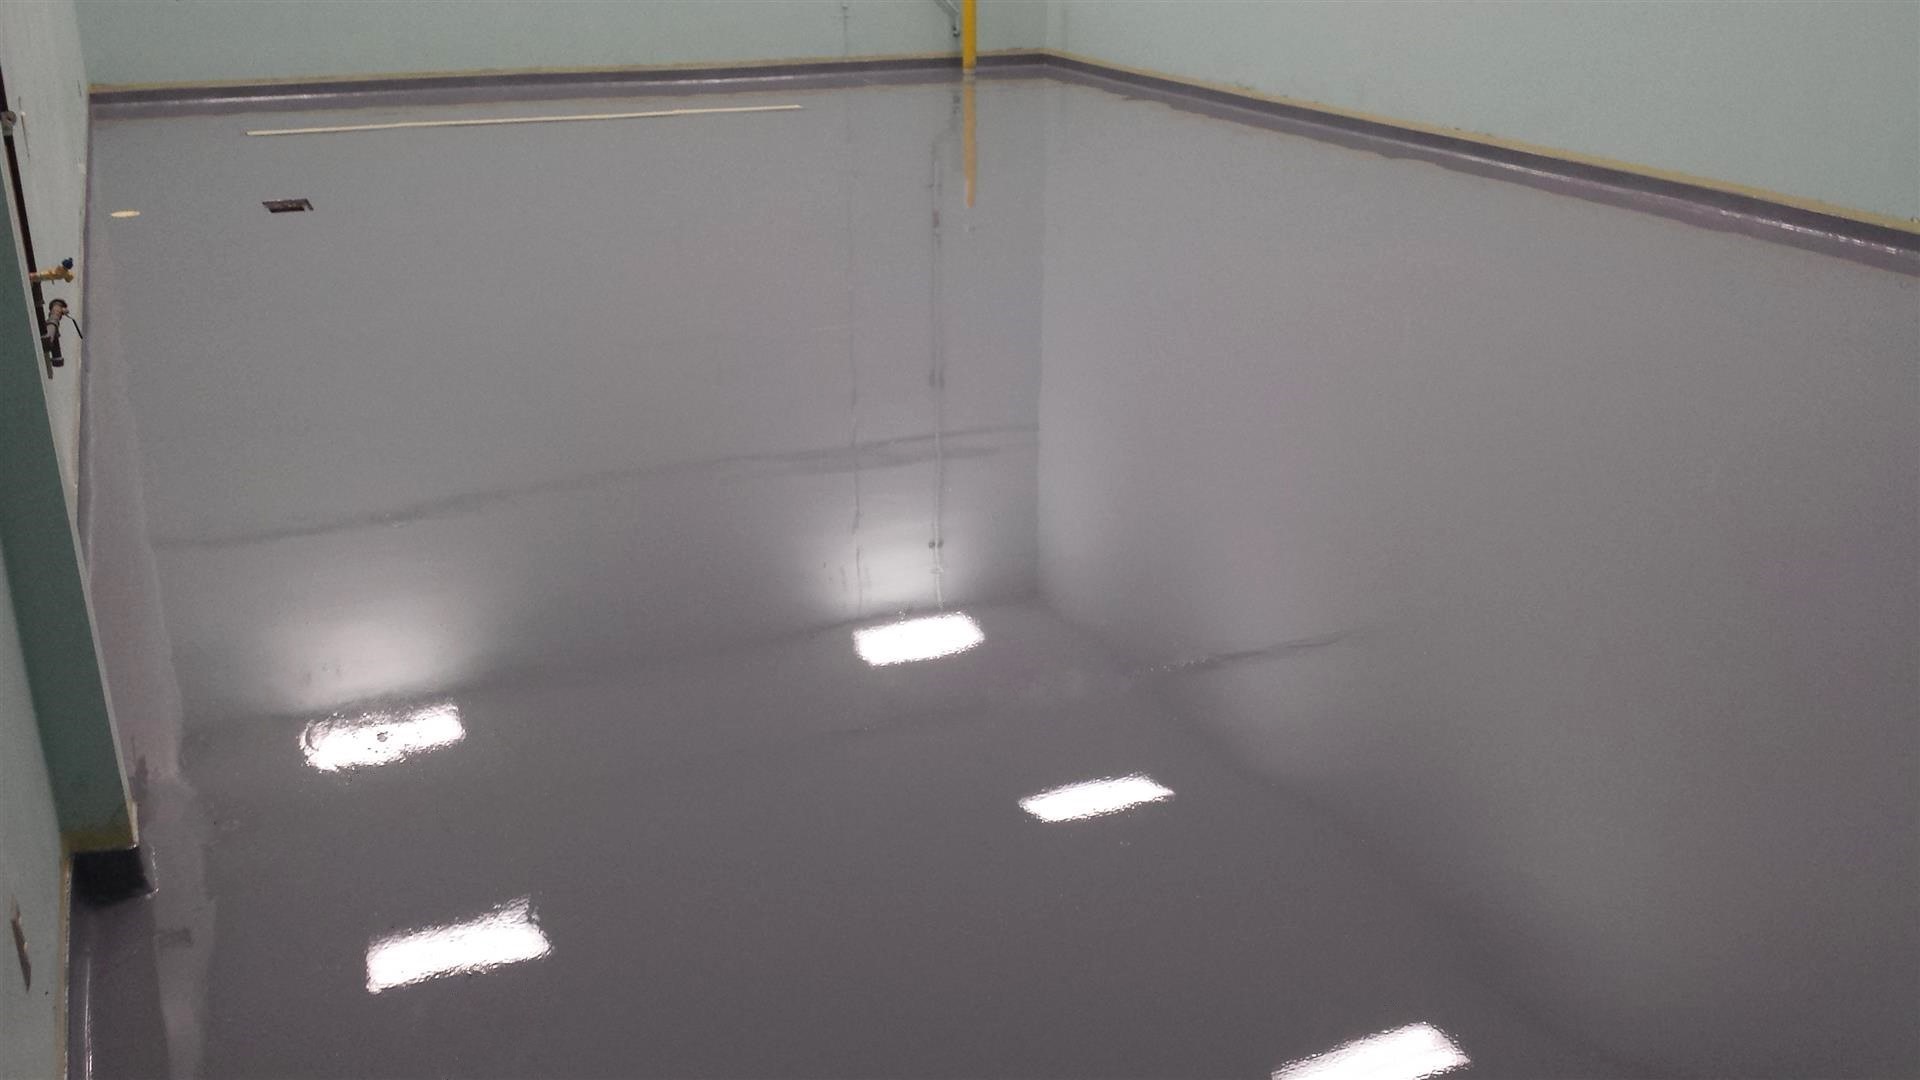 This image shows a floor that was newly painted with epoxy flooring.